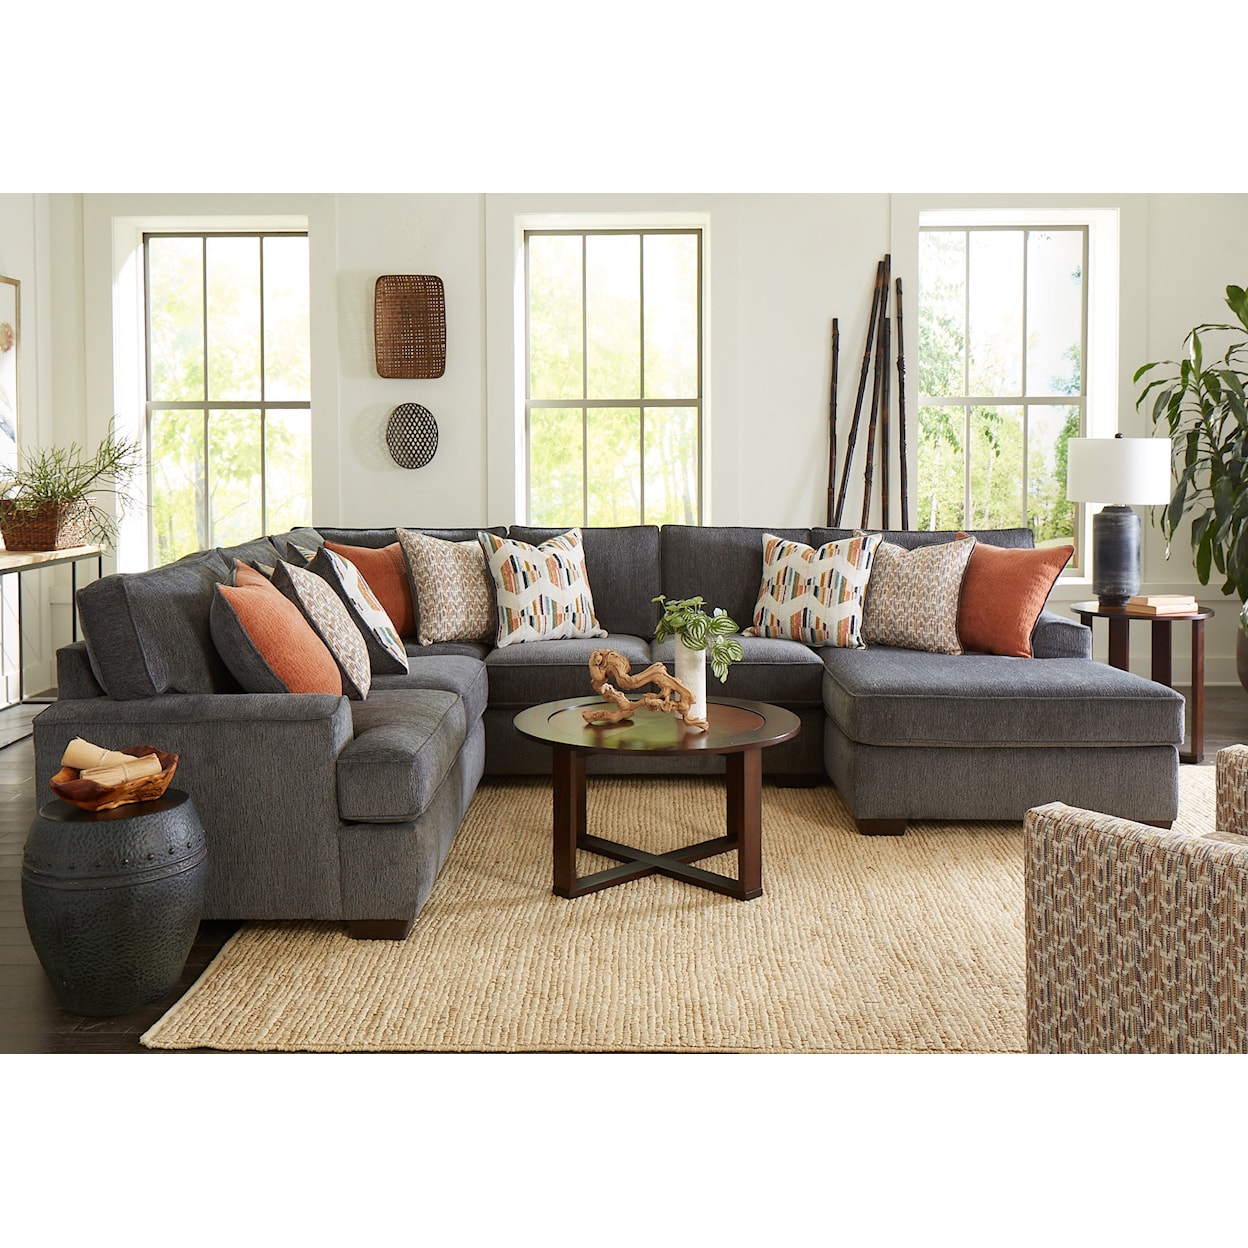 Behold Home BH3550 Rockport Sectional Sofa